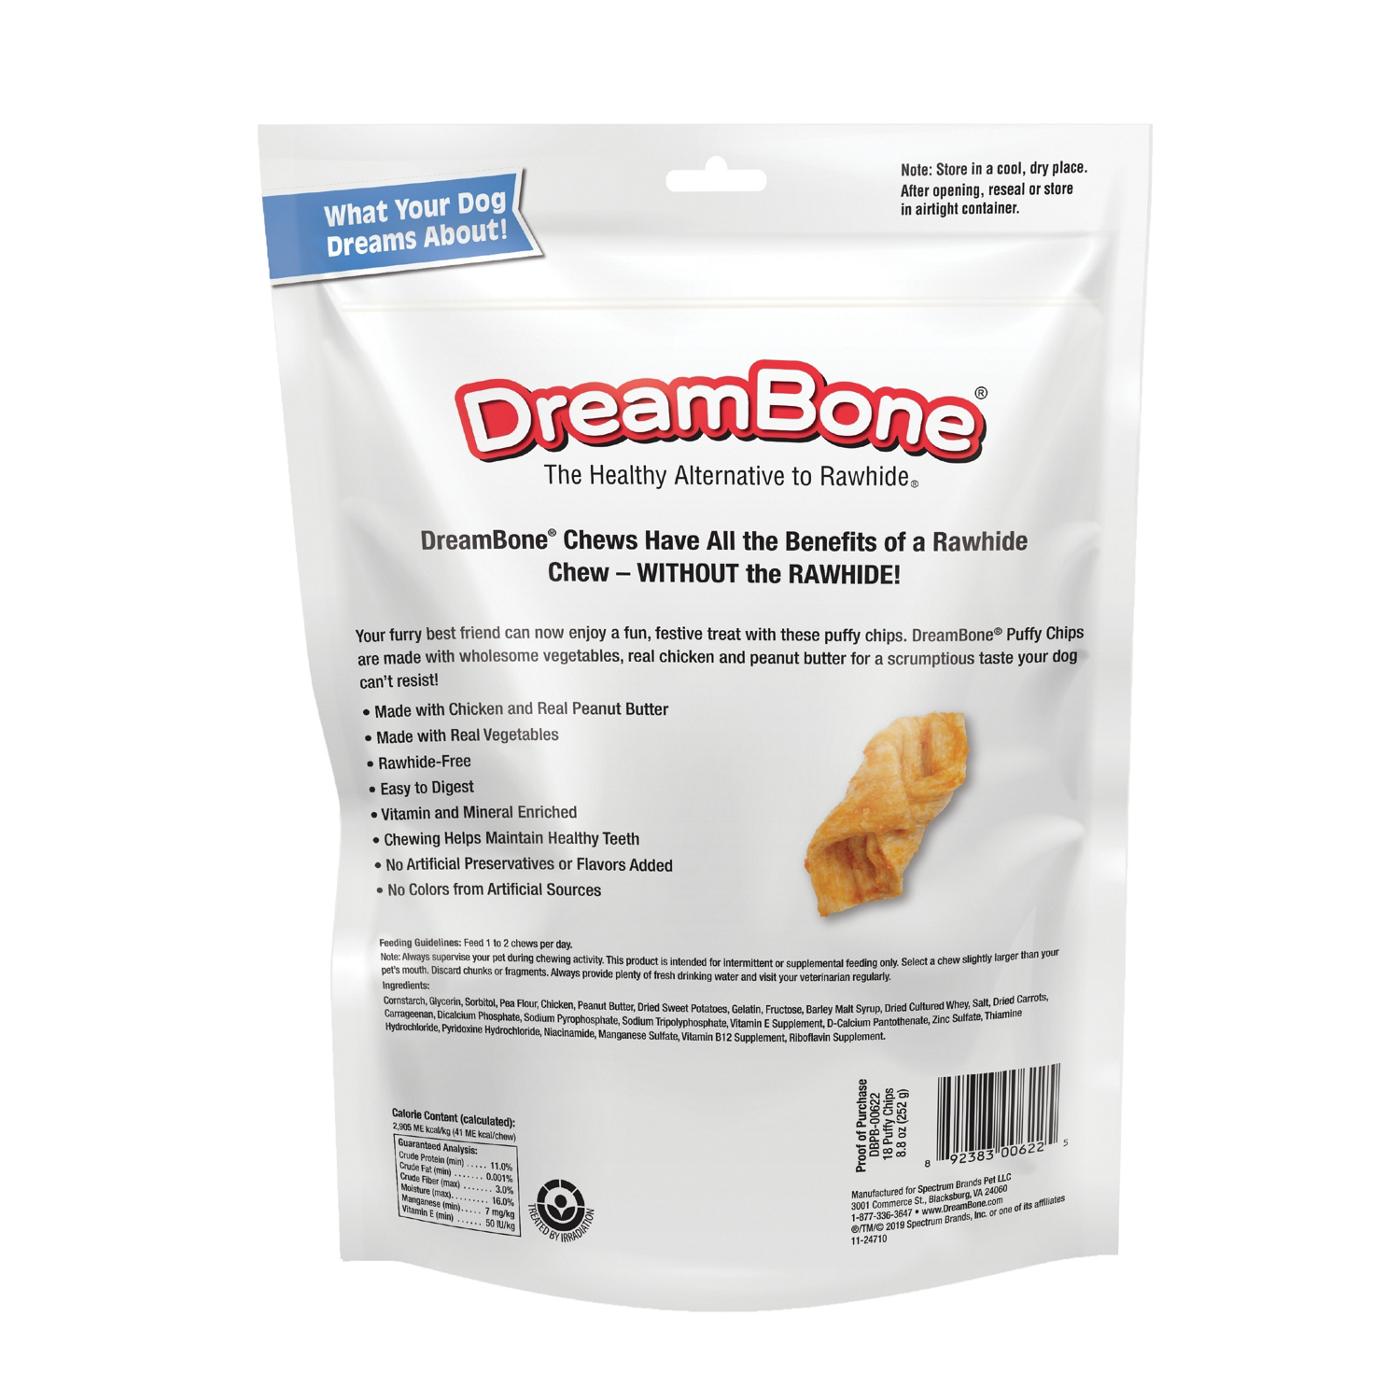 DreamBone Peanut Butter Puffy Chips Dog Chews; image 2 of 2